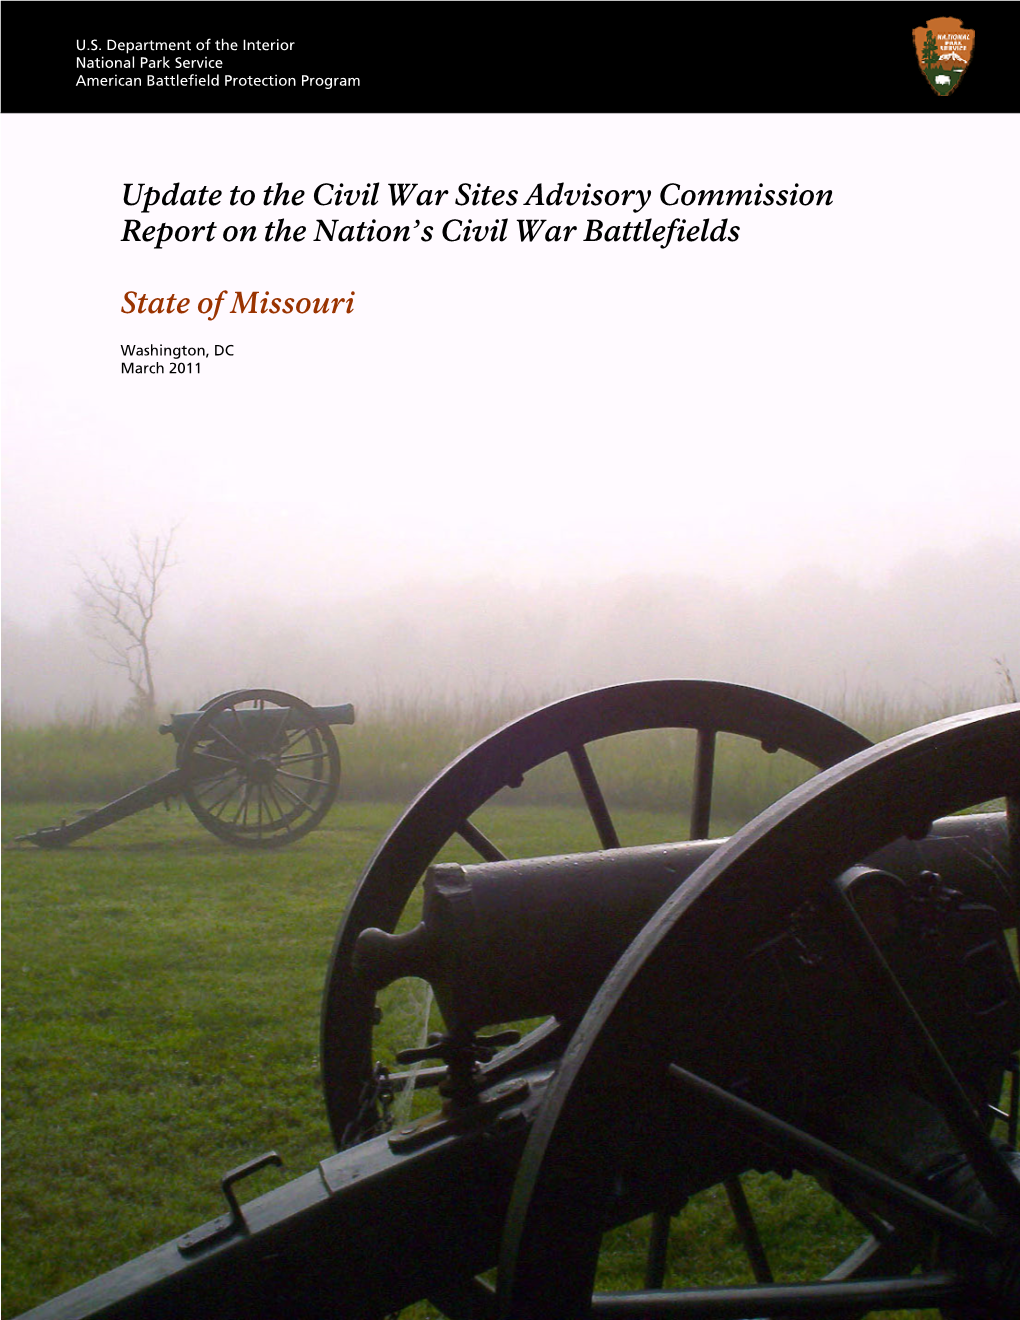 Update to the Civil War Advisory Commission Report on the Nation's